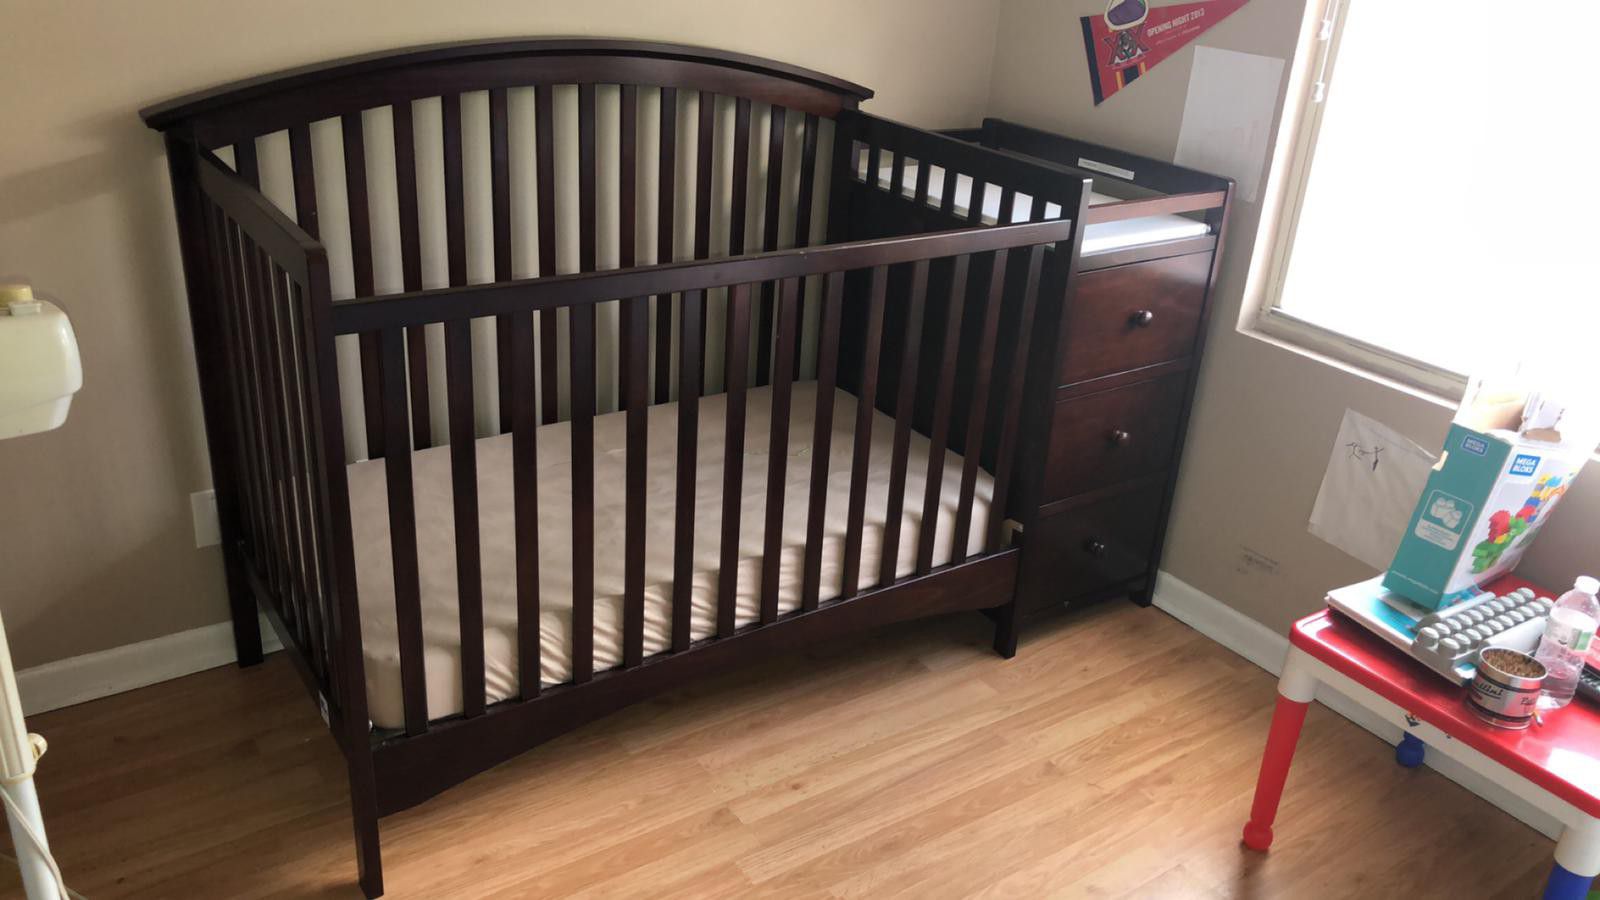 Baby crib with dresser and changing table mattress included.